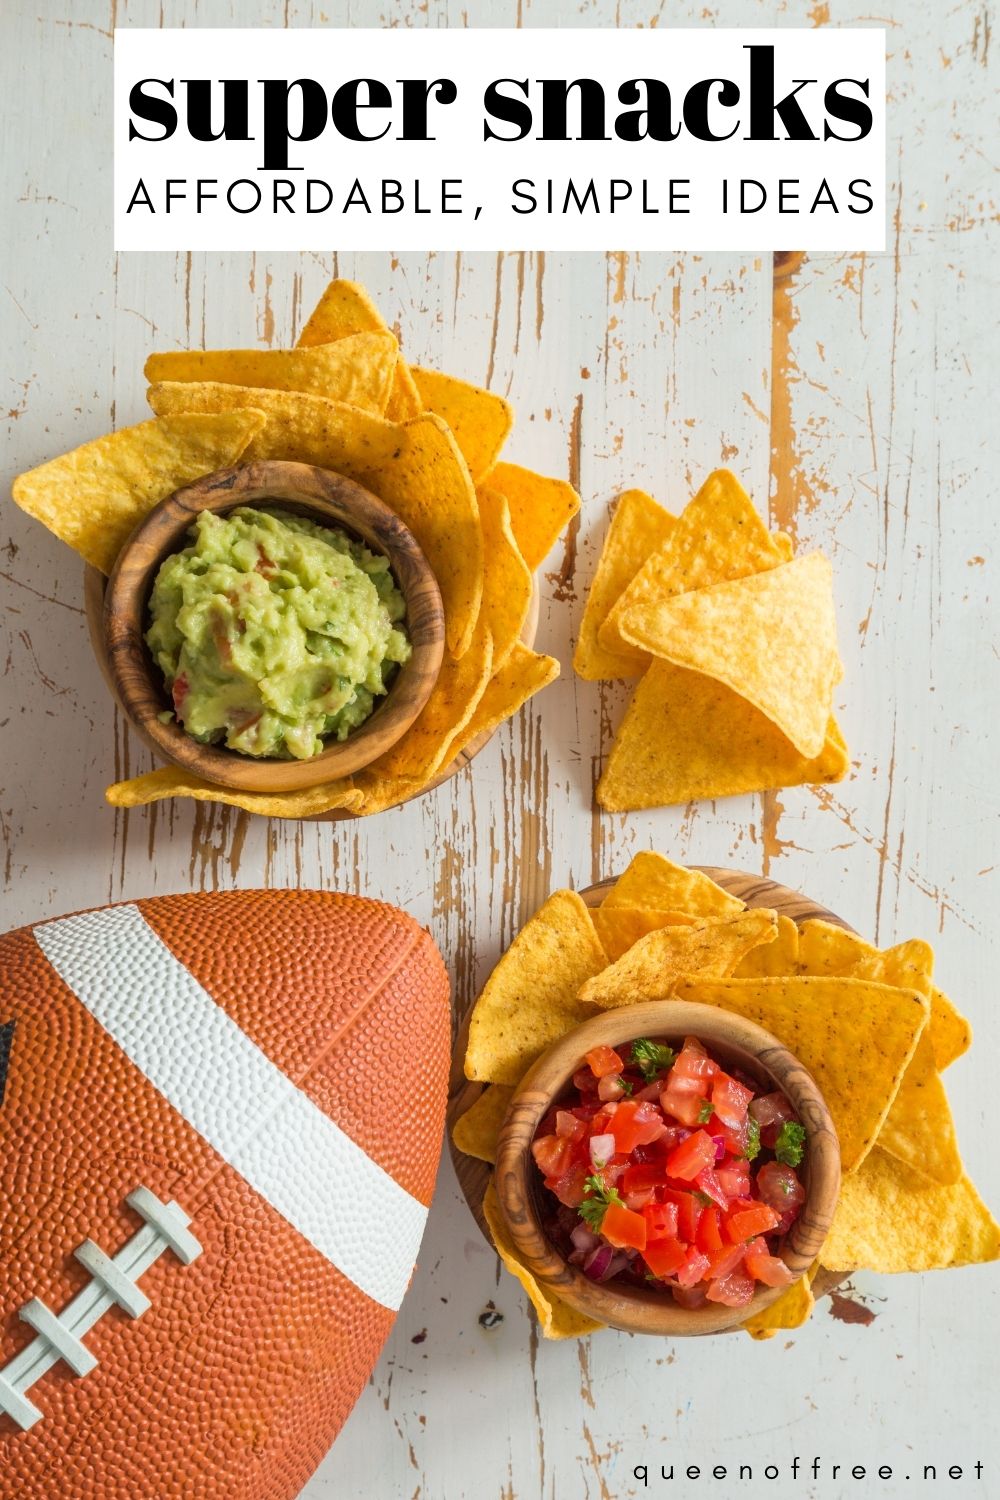 Your Big Game Snacks don't have to cost a bundle! These simple and tasty ideas will keep everyone happy without breaking the bank.